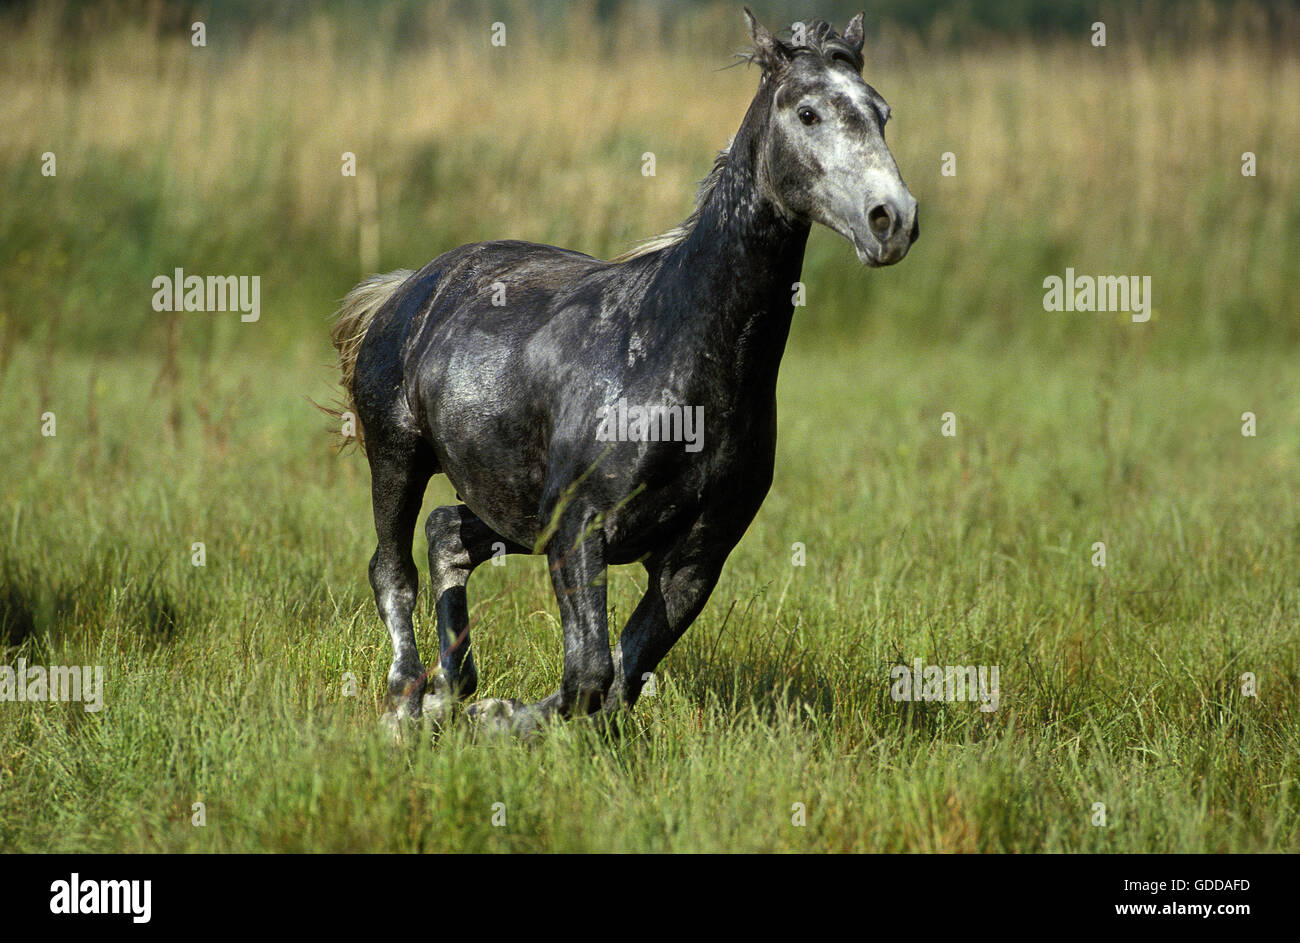 LIPIZZAN HORSE, ADULT GALLOPING THROUGH MEADOW Stock Photo